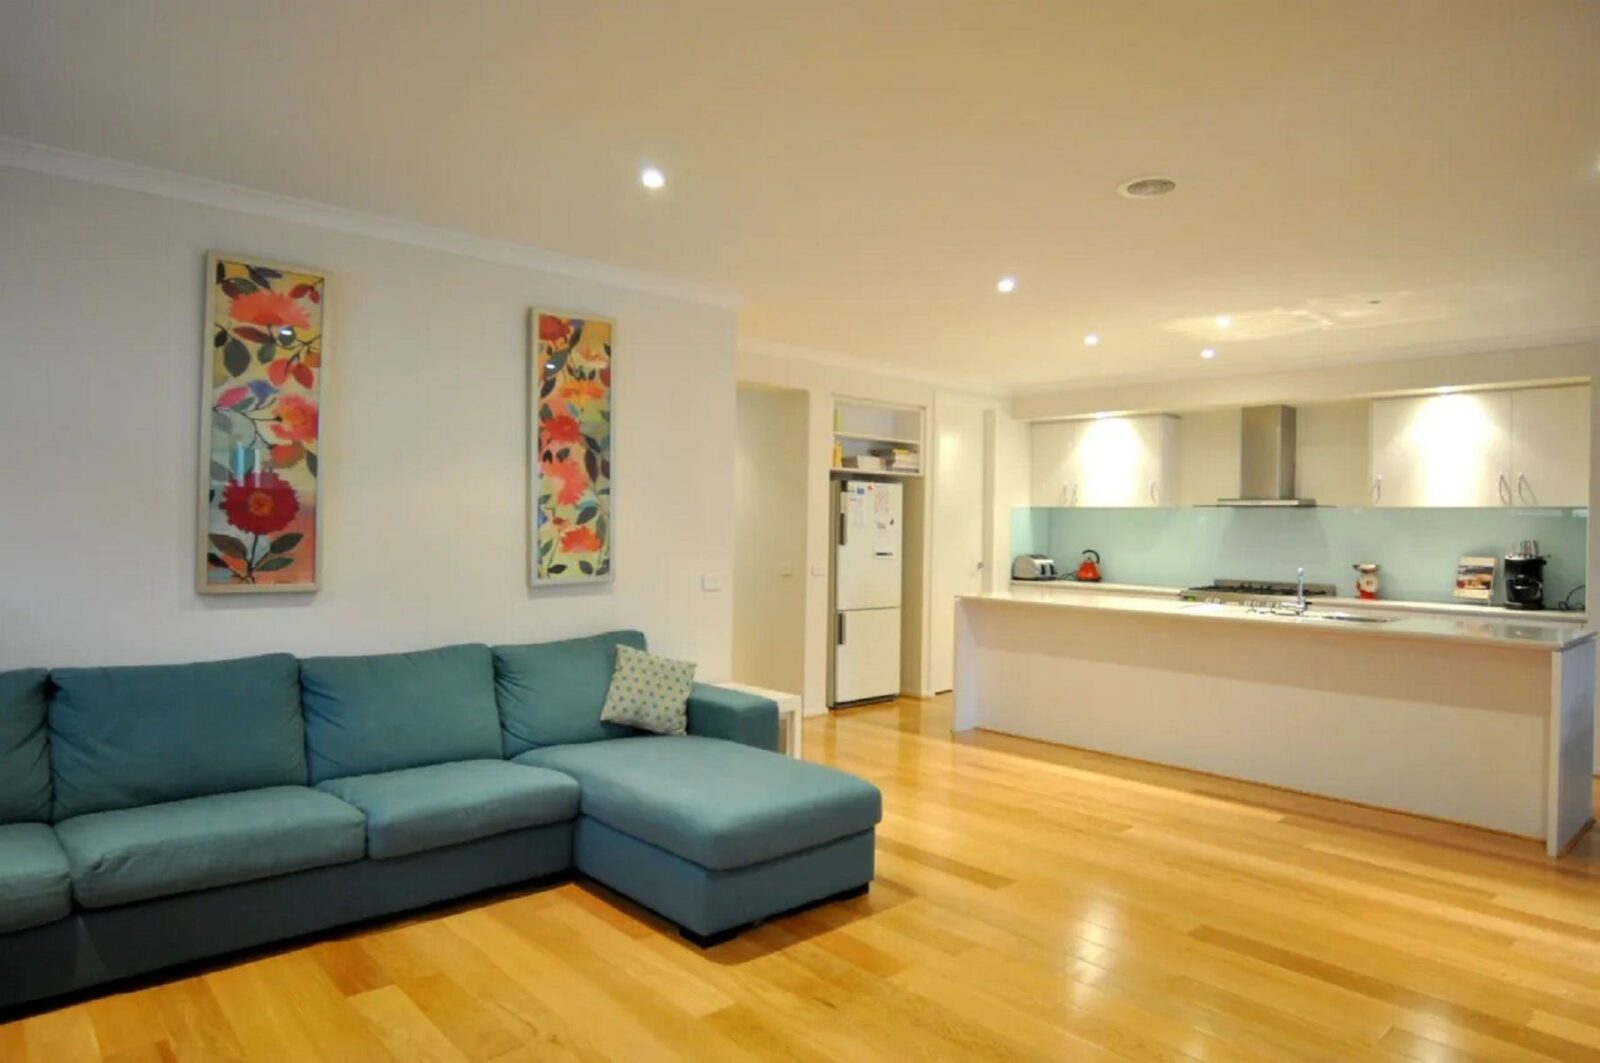 Image of main living space showing very large couch, kitchen with island bench, timber floors modern